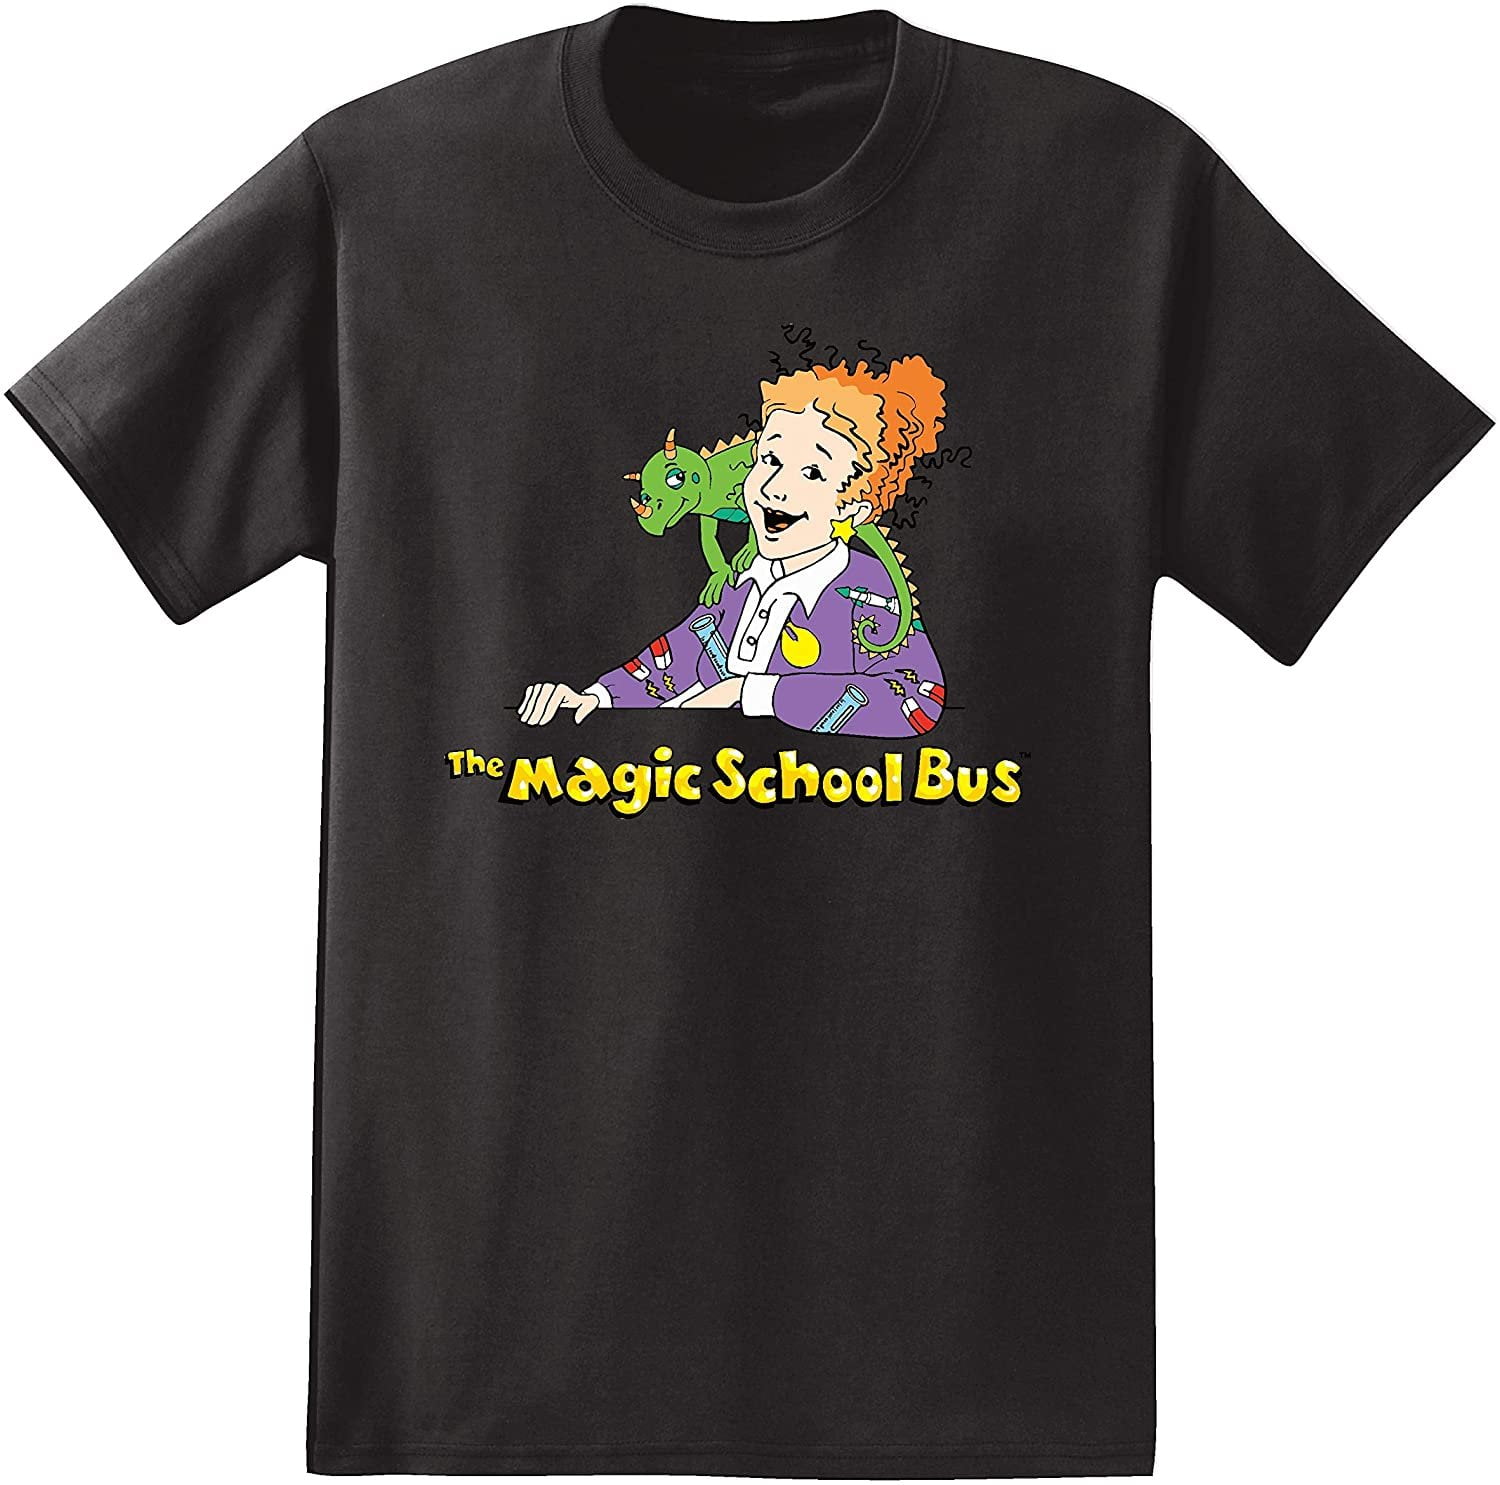 Magic School Bus tee shirt Miss Frizzle quote tshirt Miss frizzle magic school bus shirt Science tee shirt Nerdy kids tee 90s kid tee shirt